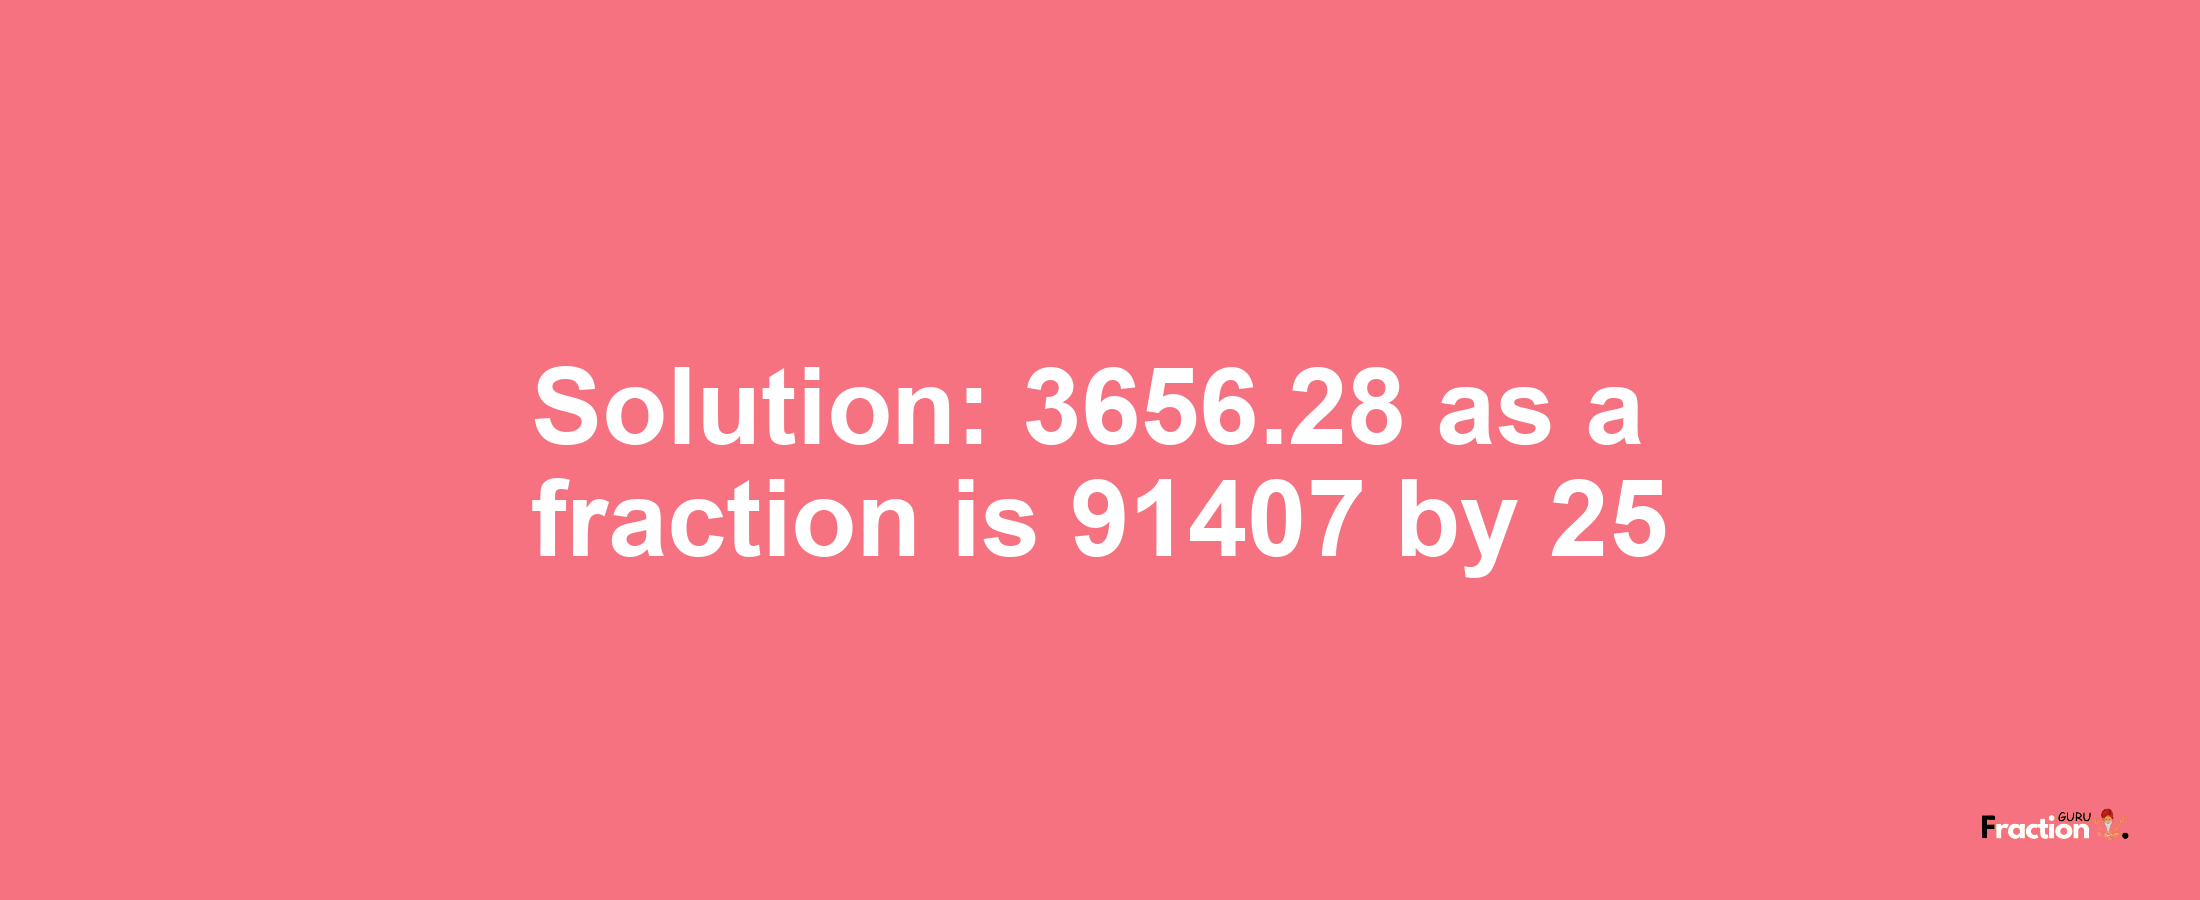 Solution:3656.28 as a fraction is 91407/25